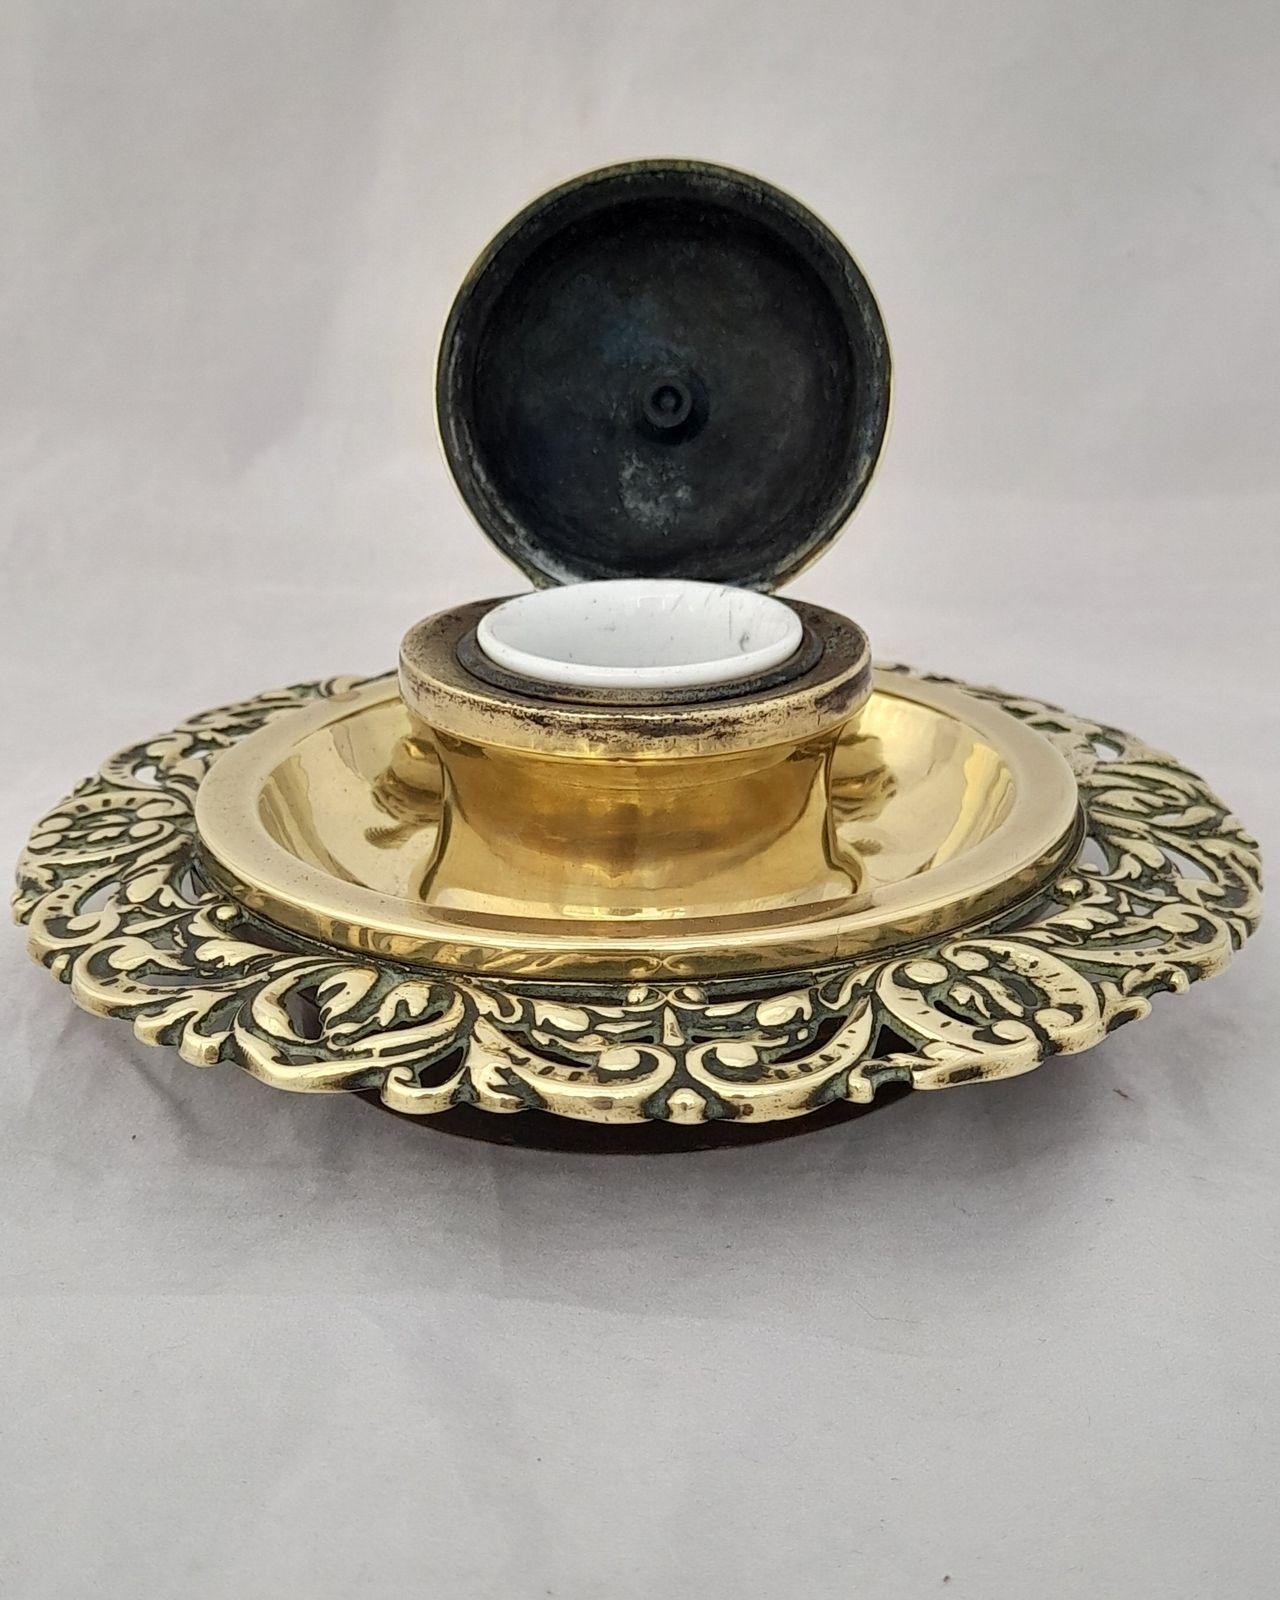 Antique neo rococo style brass hinged lidded inkwell with liner & pen stand cast rococo scroll decoration circa 1870